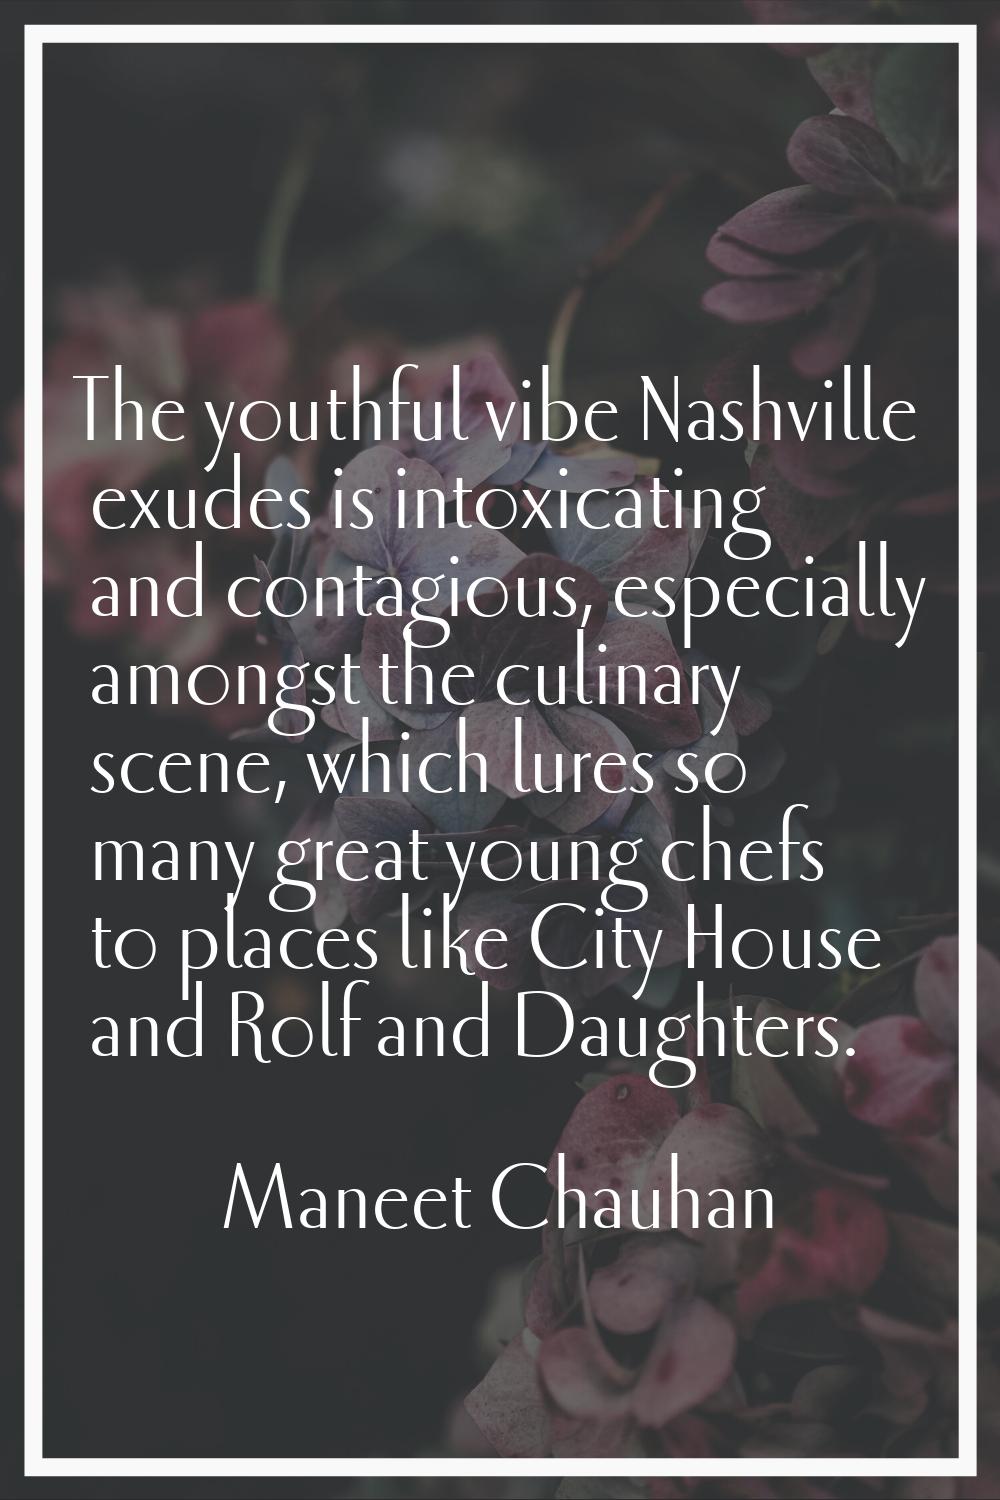 The youthful vibe Nashville exudes is intoxicating and contagious, especially amongst the culinary 